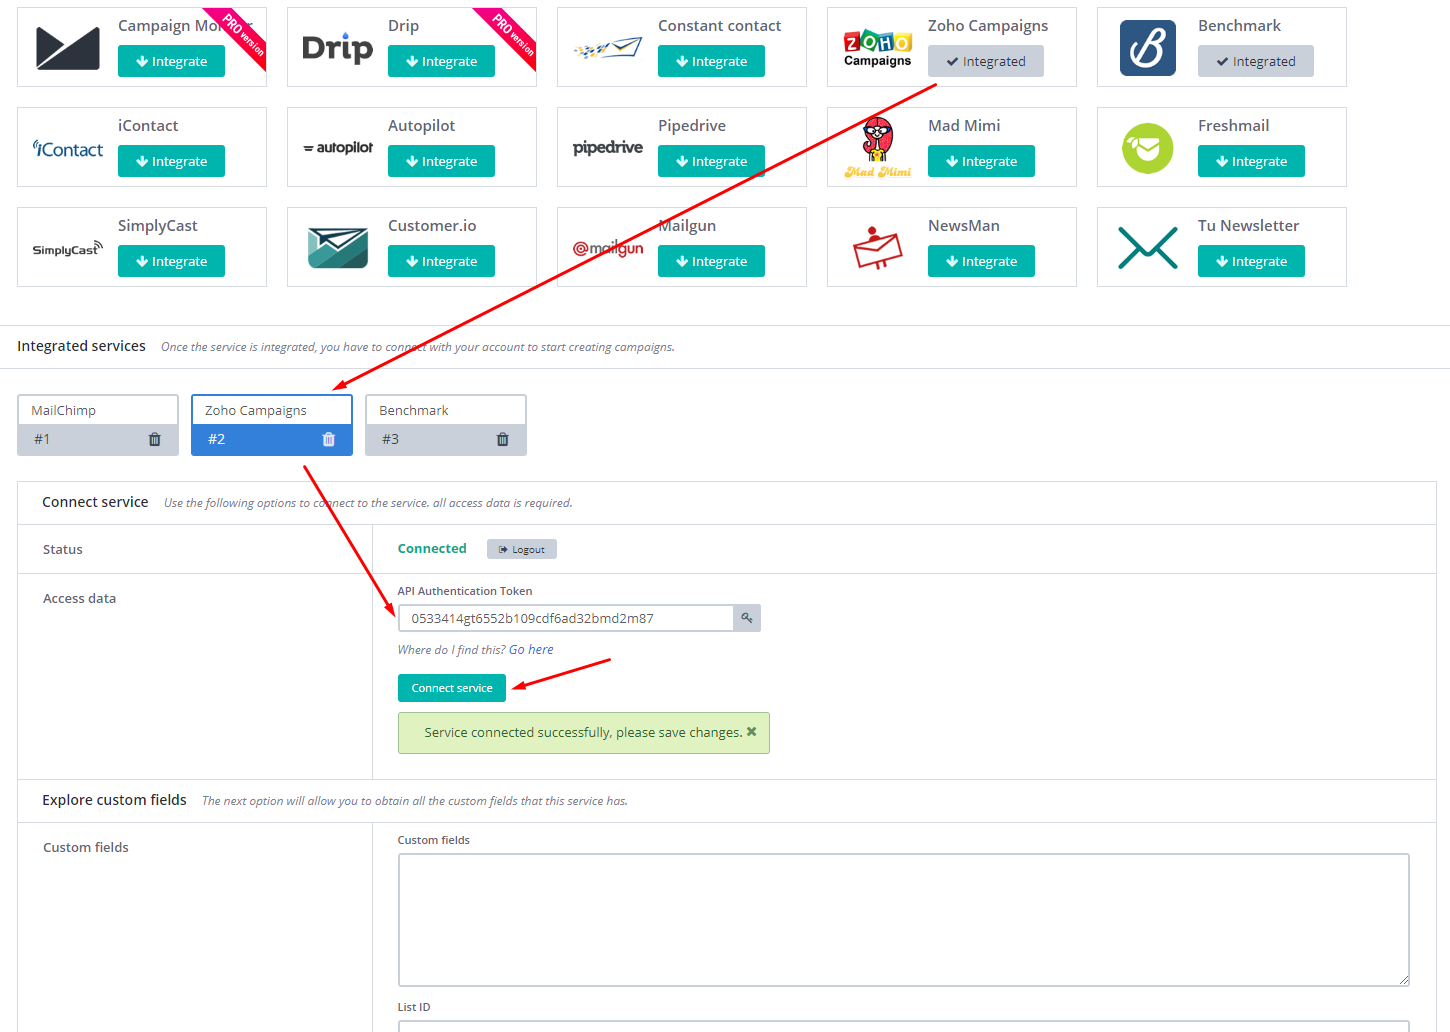 Zoho Campaigns Integration and successful connection